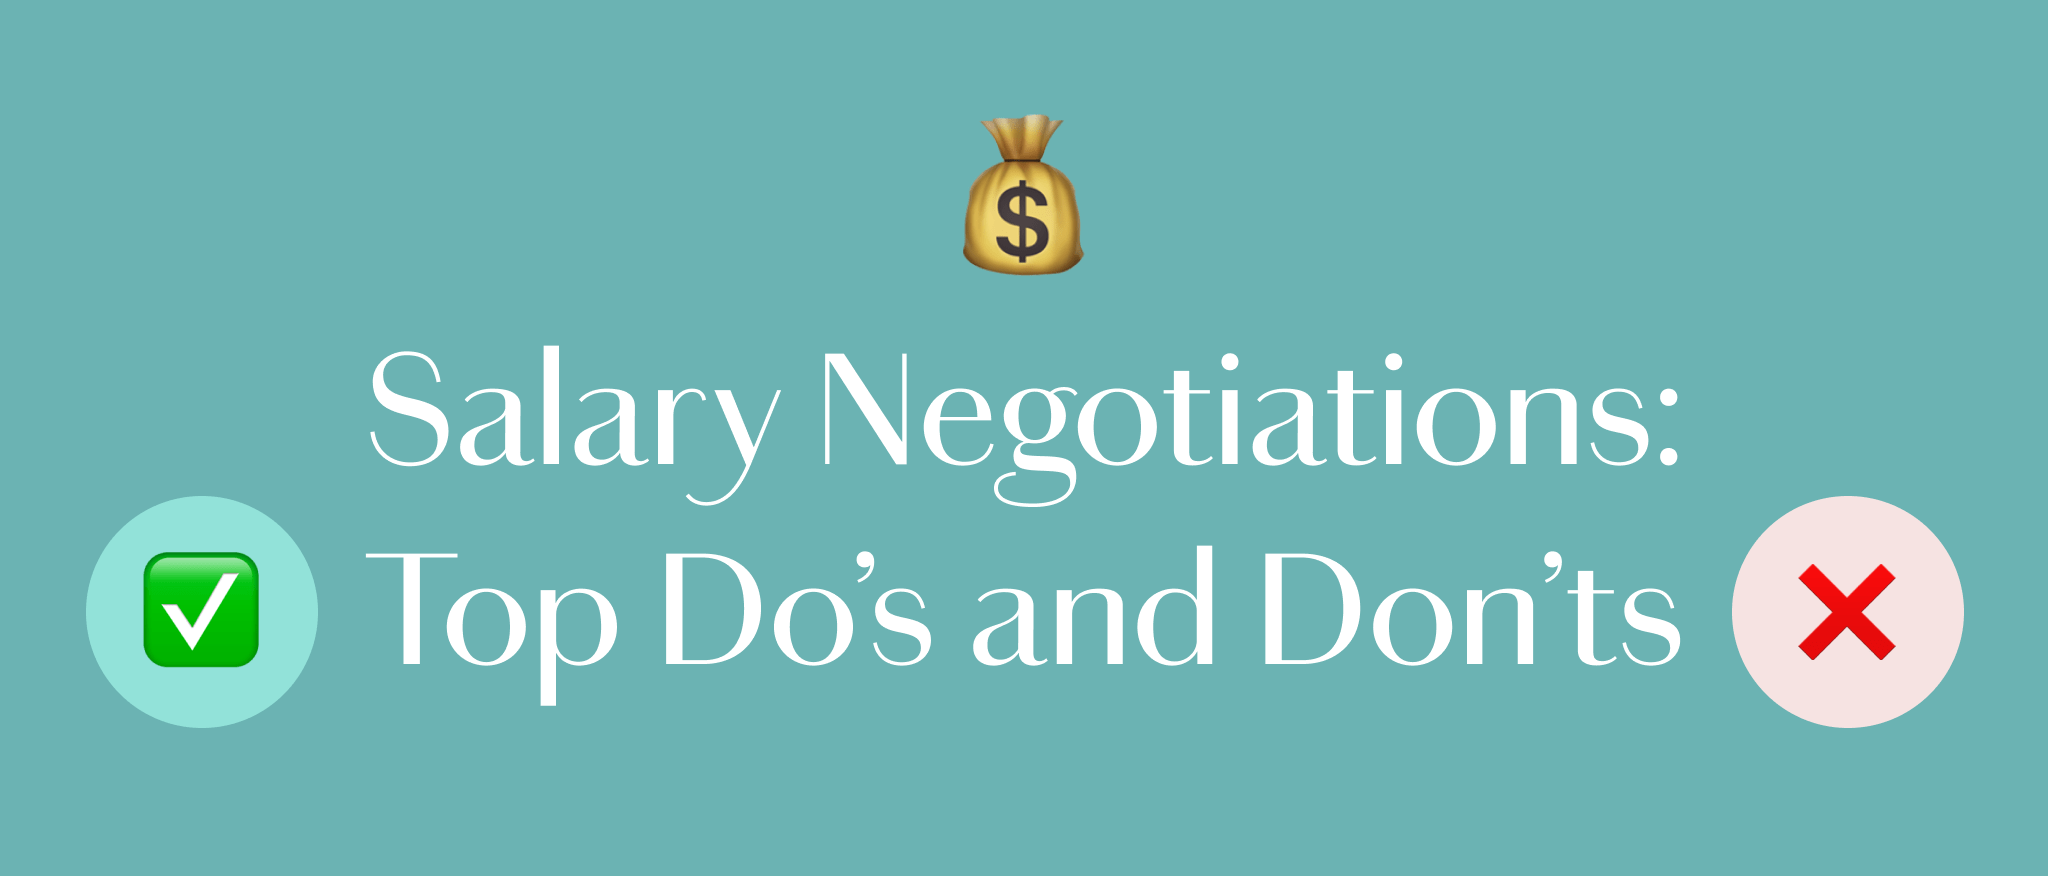 The Top 20s Do’s and Don’ts of Salary Negotiation, According to Expert